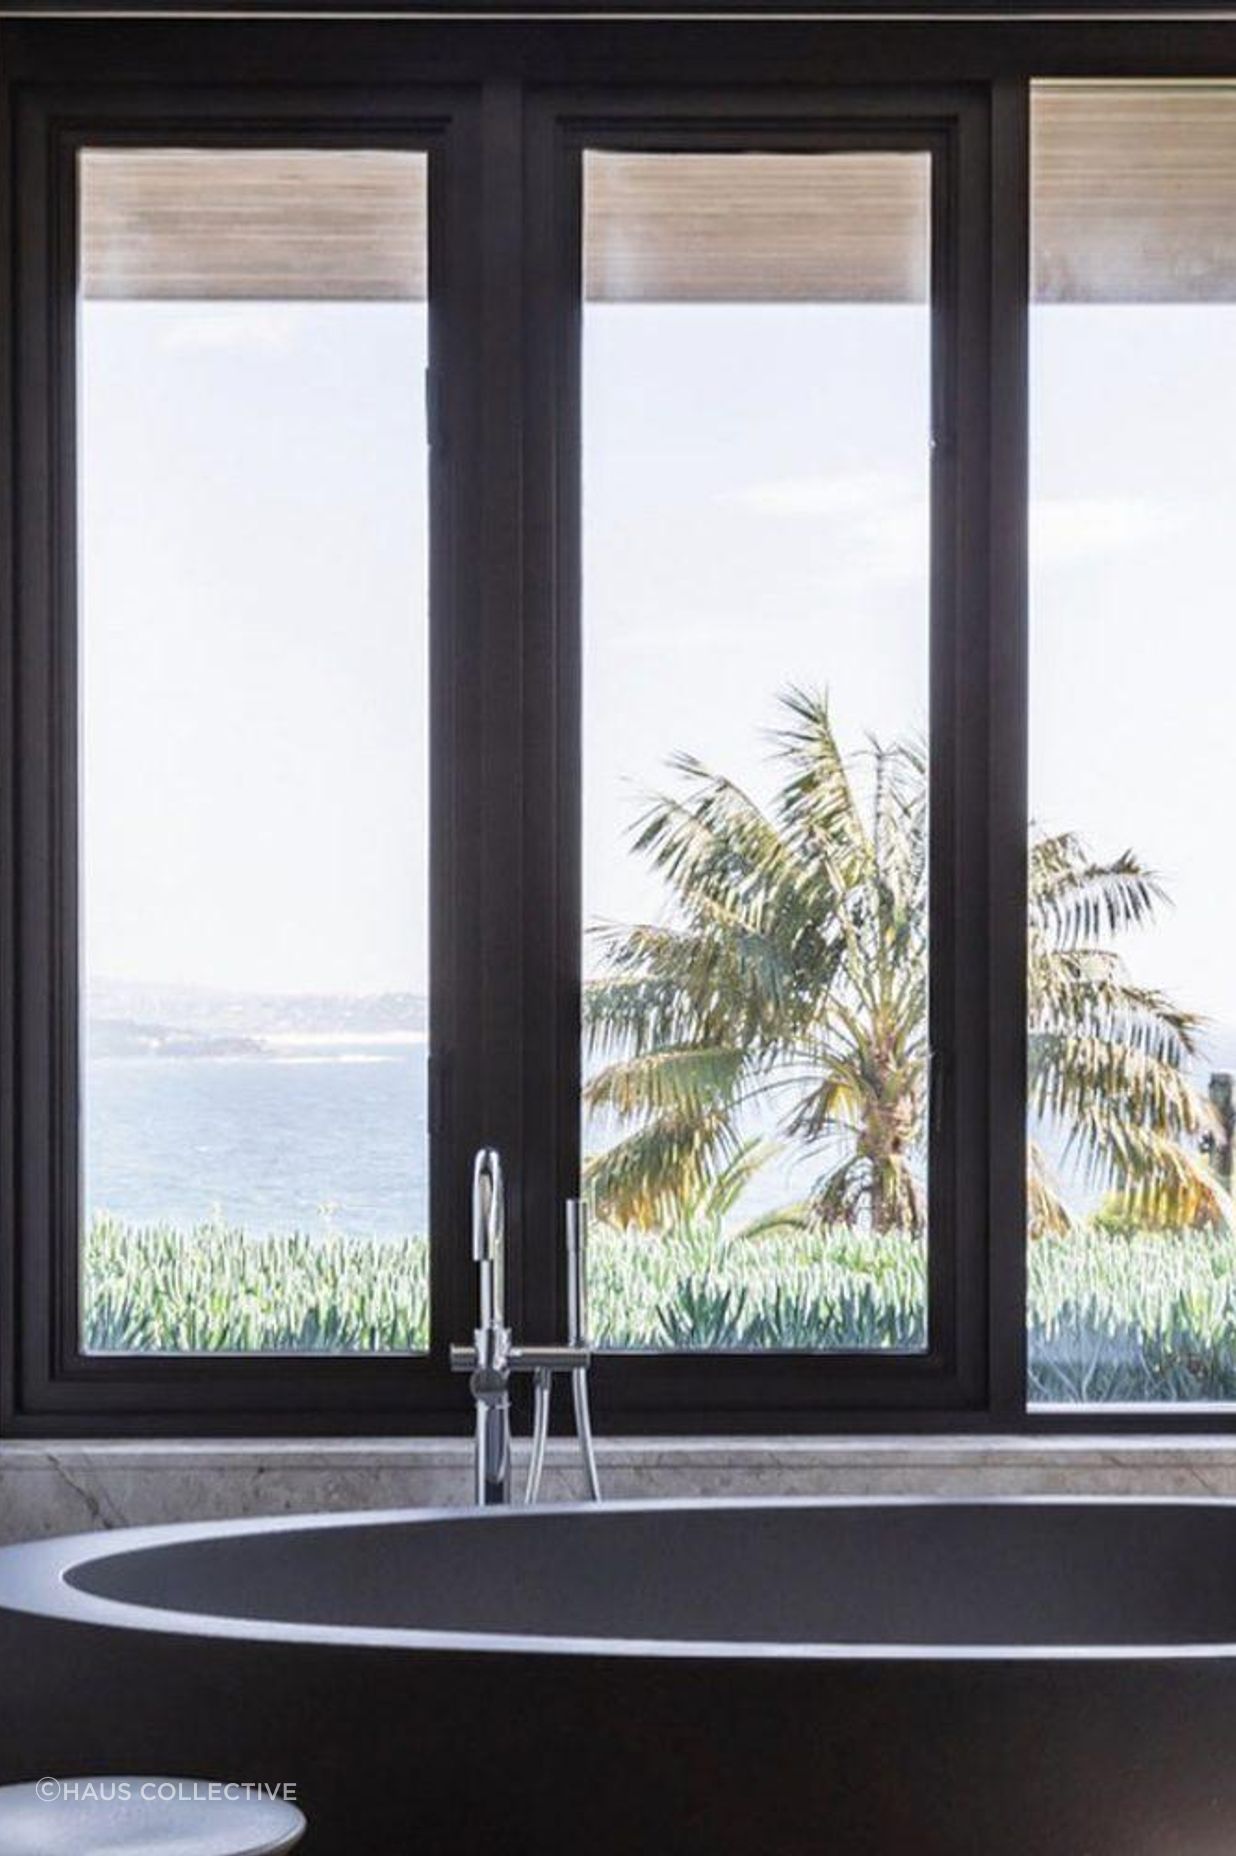 A freestanding bath is the perfect place to enjoy a view of the coast.